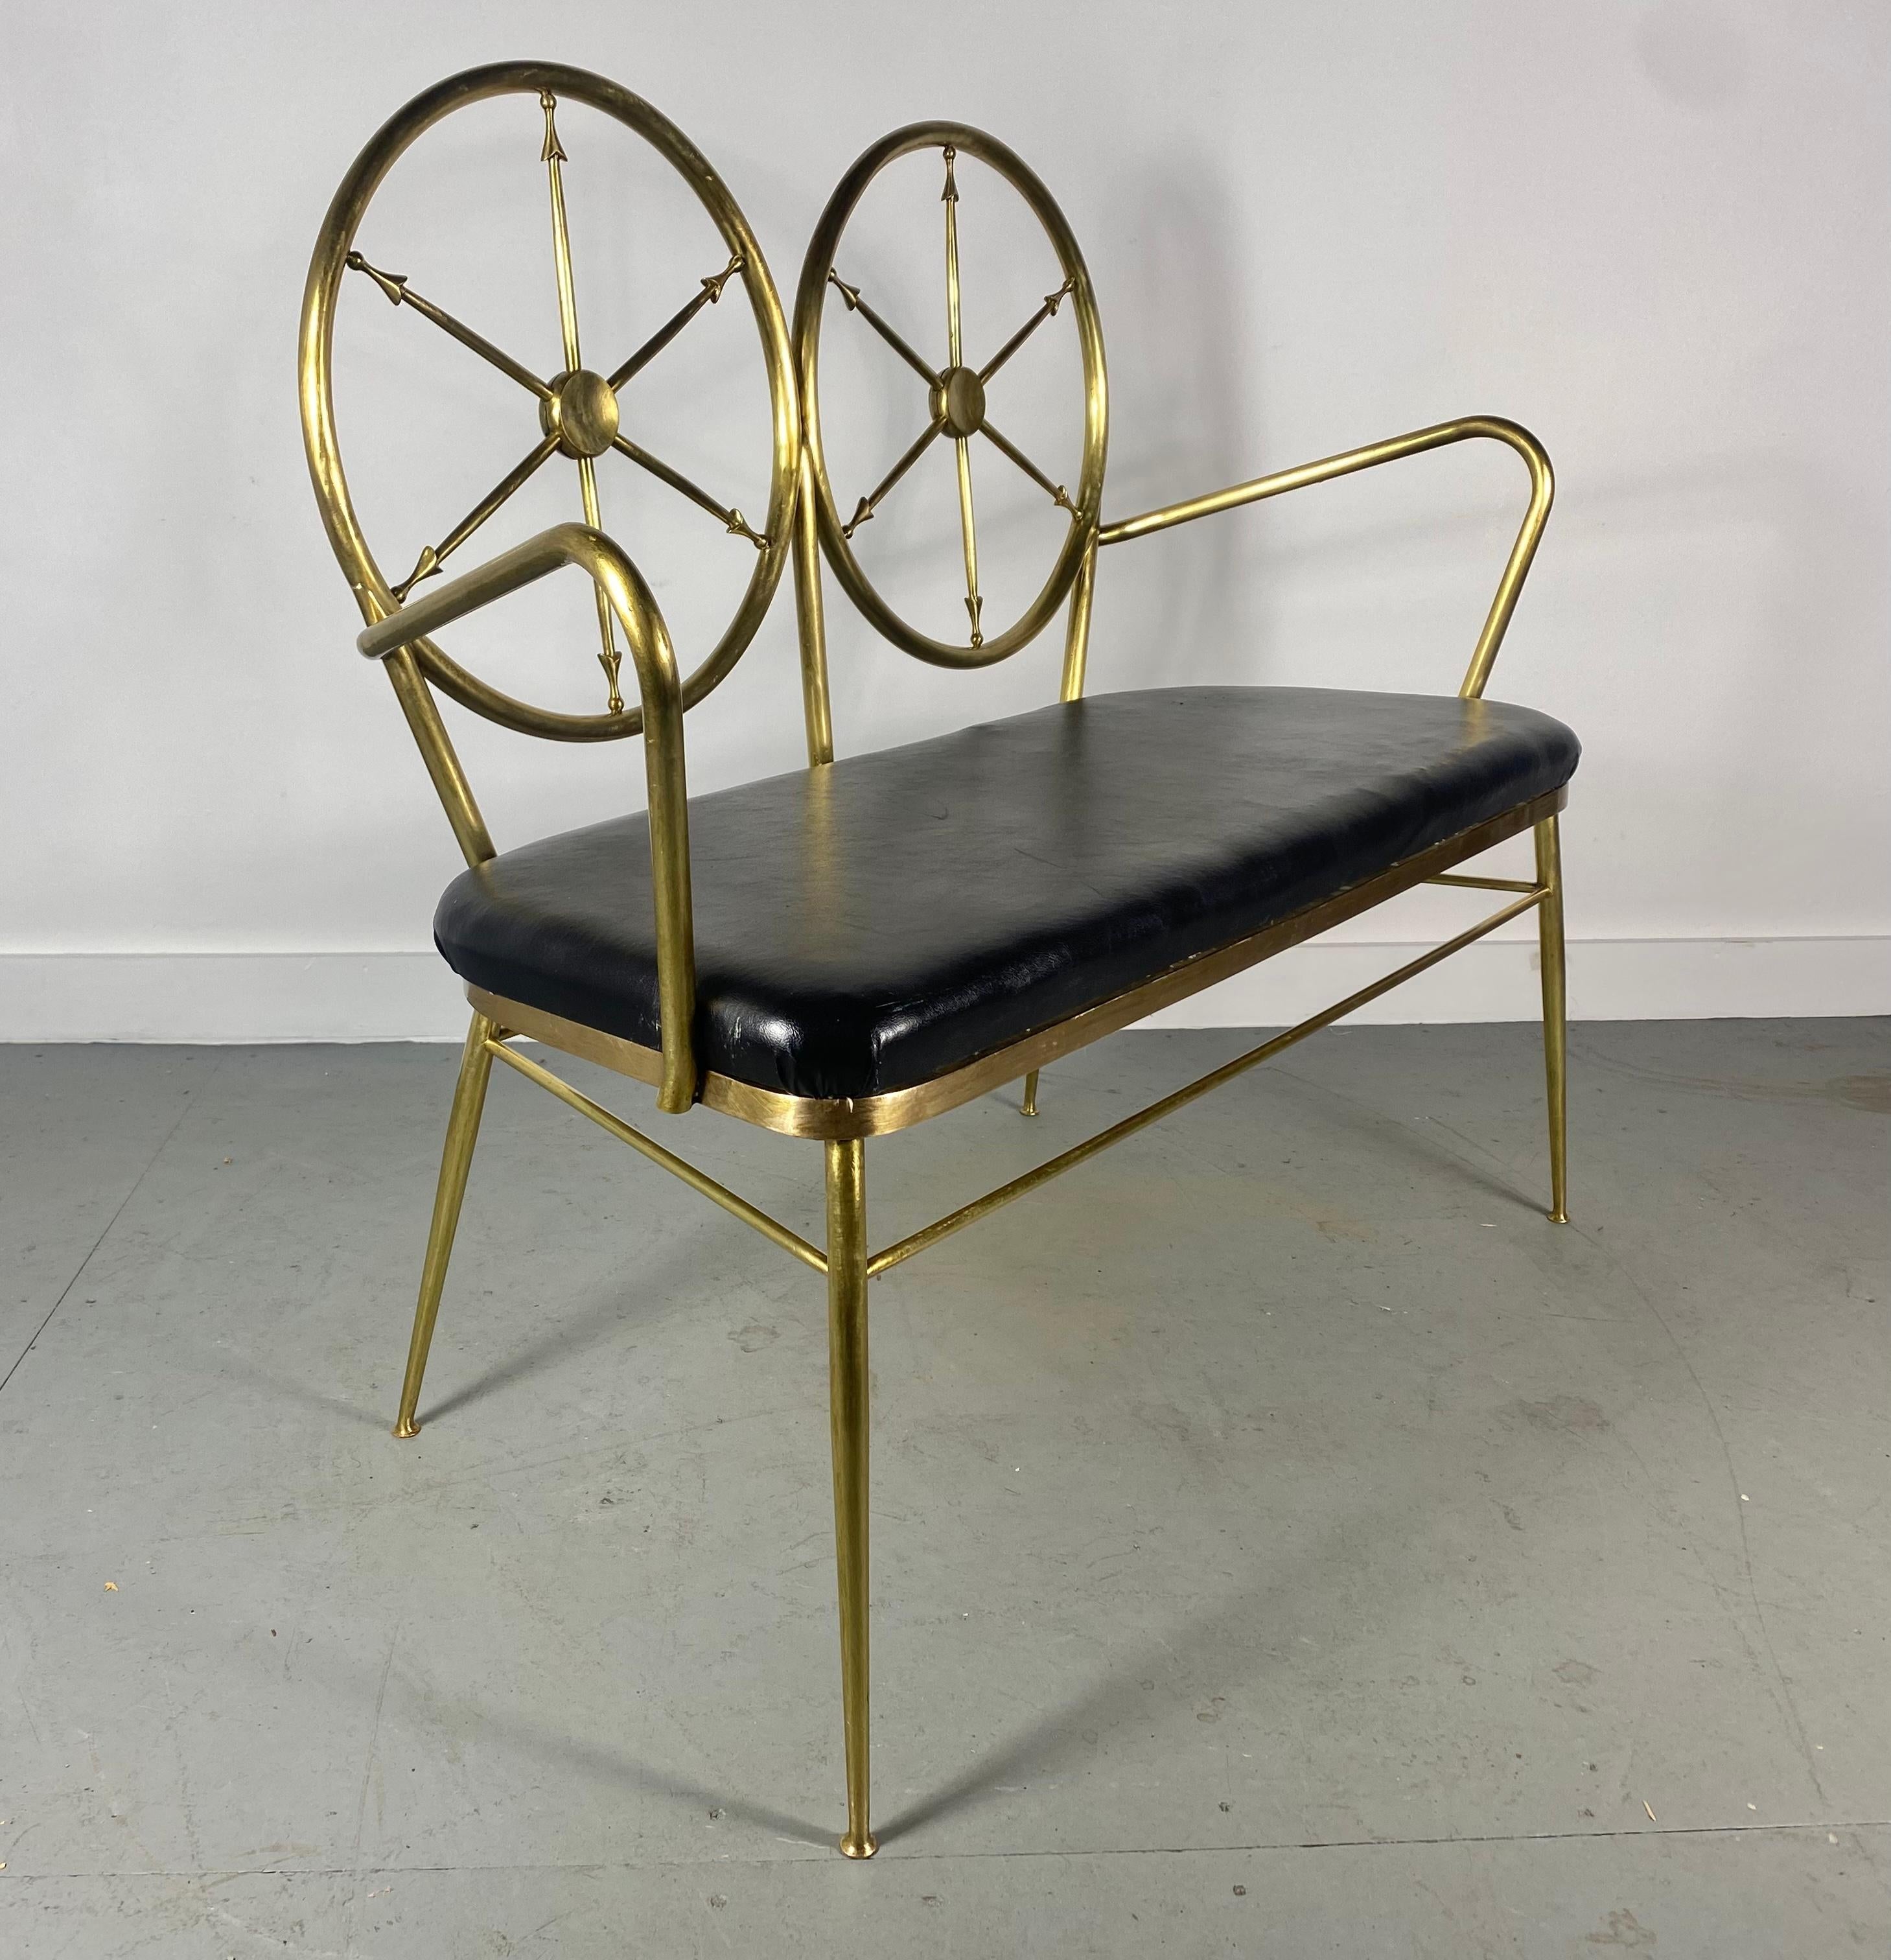 Seldom seen brass compass 2-seat bench manner of gio point. Made in Italy. Amazing quality. Retains original brass finish, wonderful patina. Also retains its original black leather seat. Imprint stamp. Made in Italy. Arm Height 26.5. Hand delivery